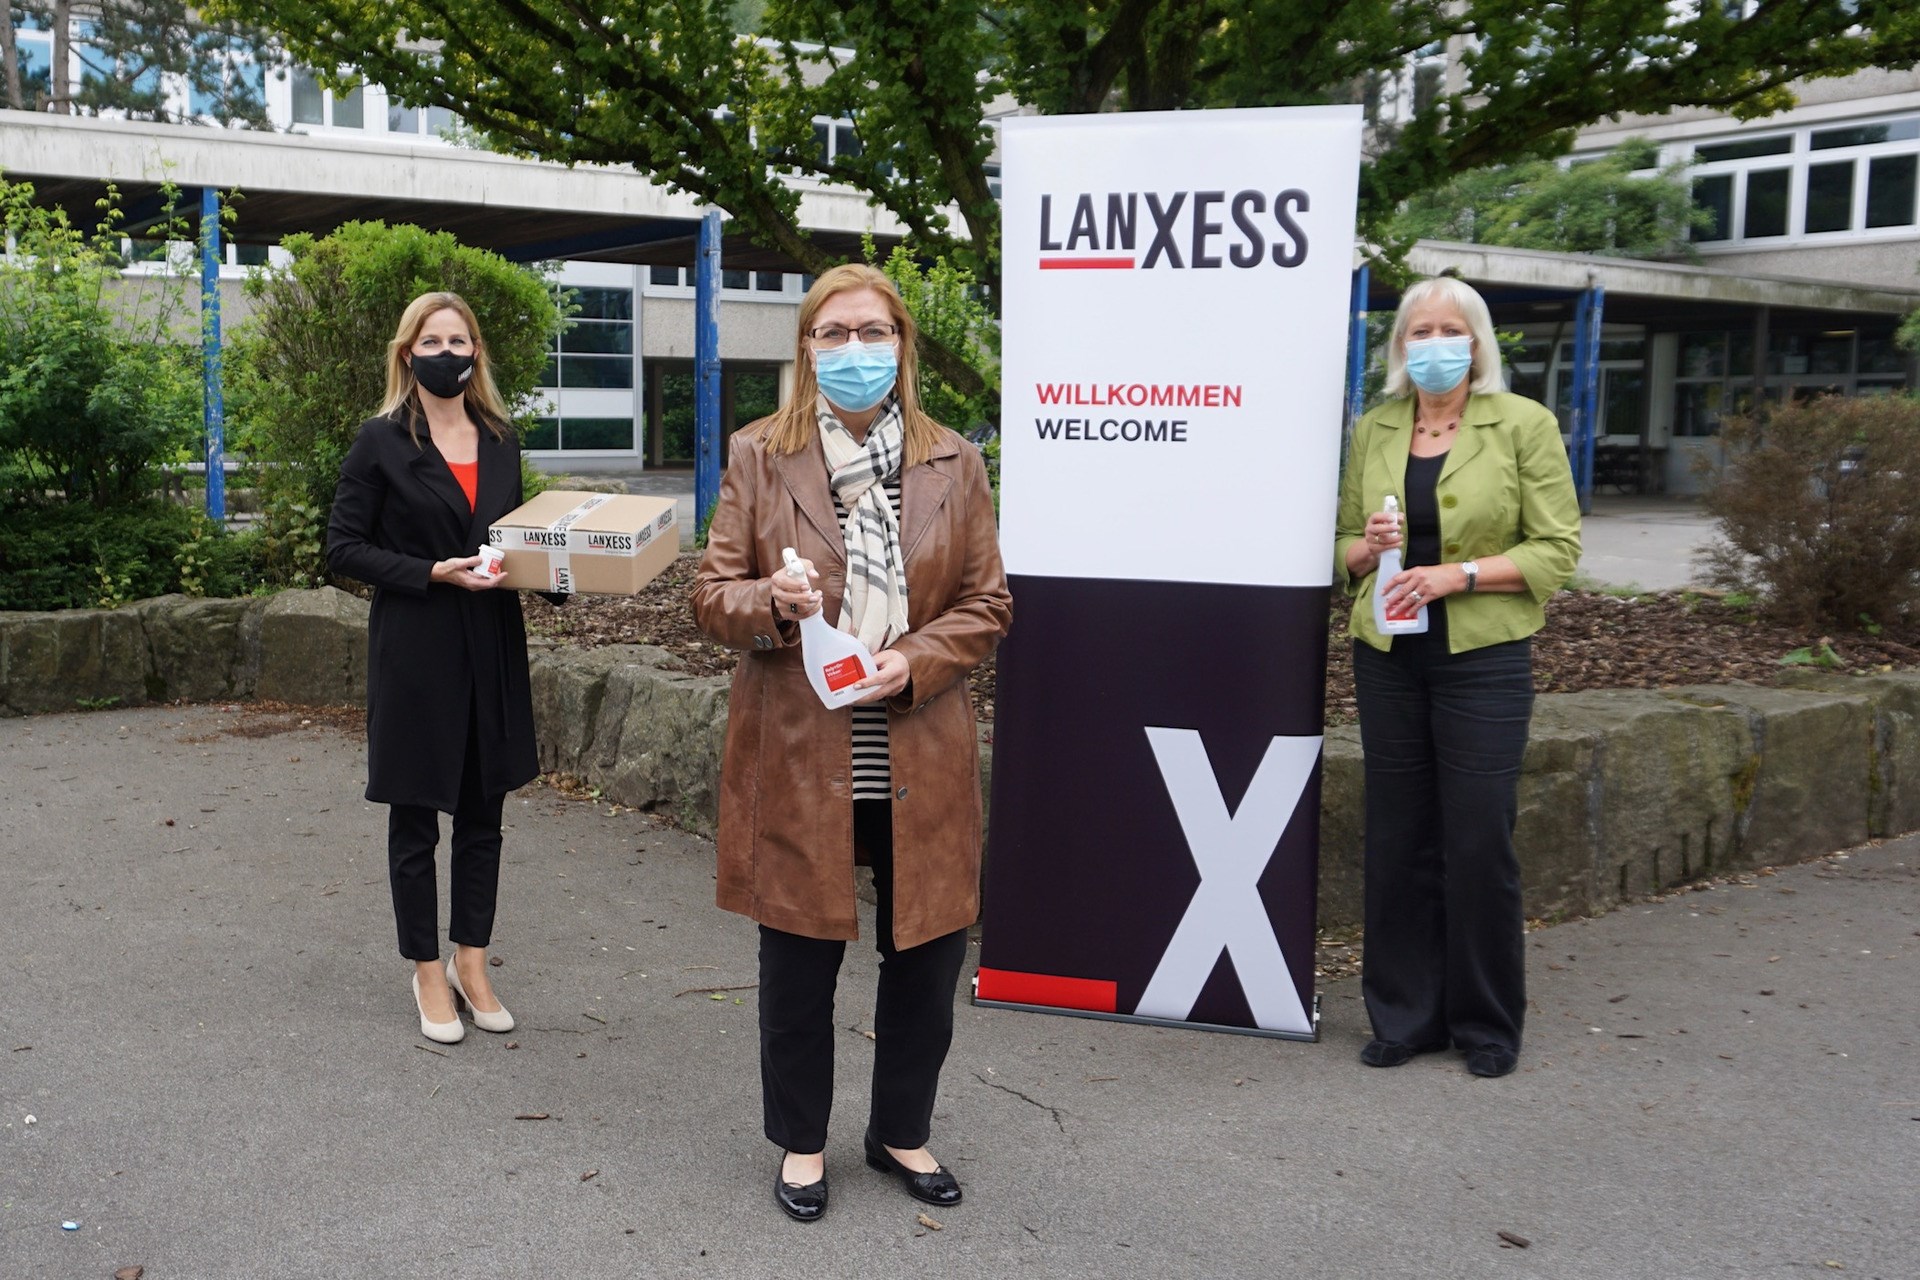 Nina Hasenkamp (from left to right), head of the LANXESS education initiative, hands over a package containing the disinfectant Rely+On Virkon, representing all schools in Bergkamen, to Christine Busch, head of the Bergkamen City School Board, and Bärbel Heidenreich, head of the Bergkamen Municipal High School.